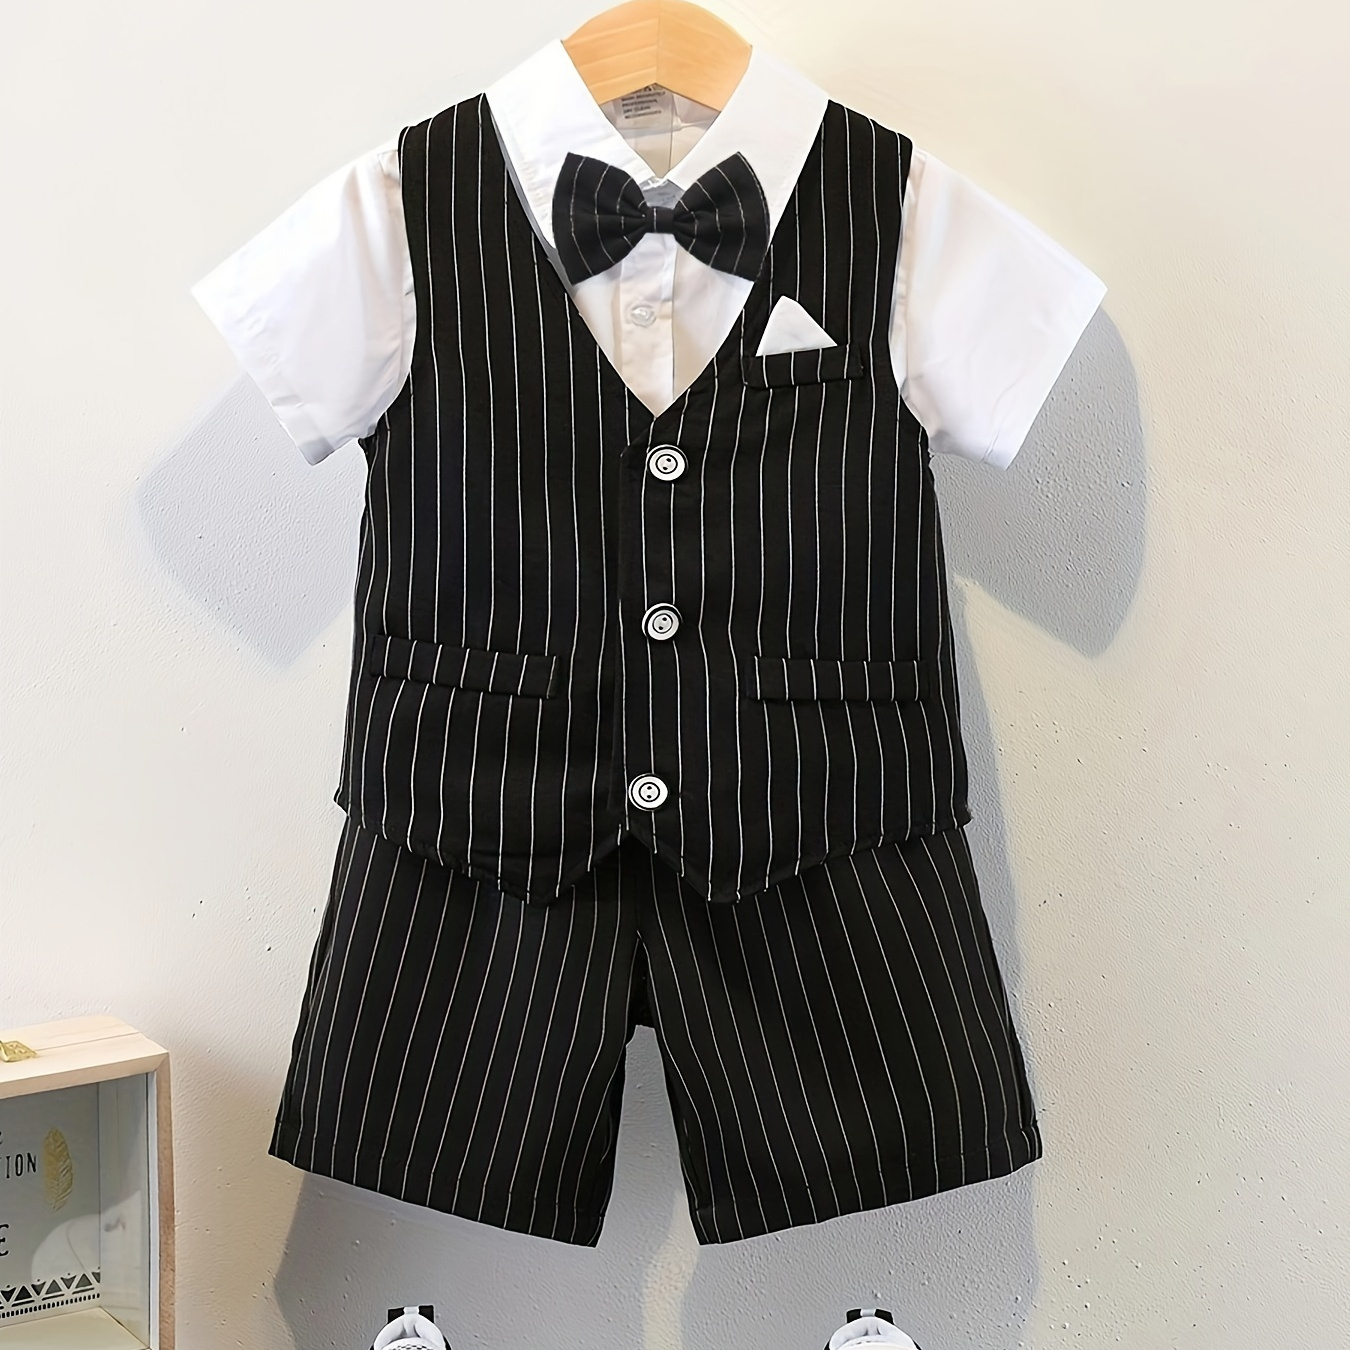 

Boys Short Sleeve Gentleman Outfit, Trendy Striped Pattern Vest & Shirt & Suspenders Shorts, Boys Clothes For Speech Birthday Party